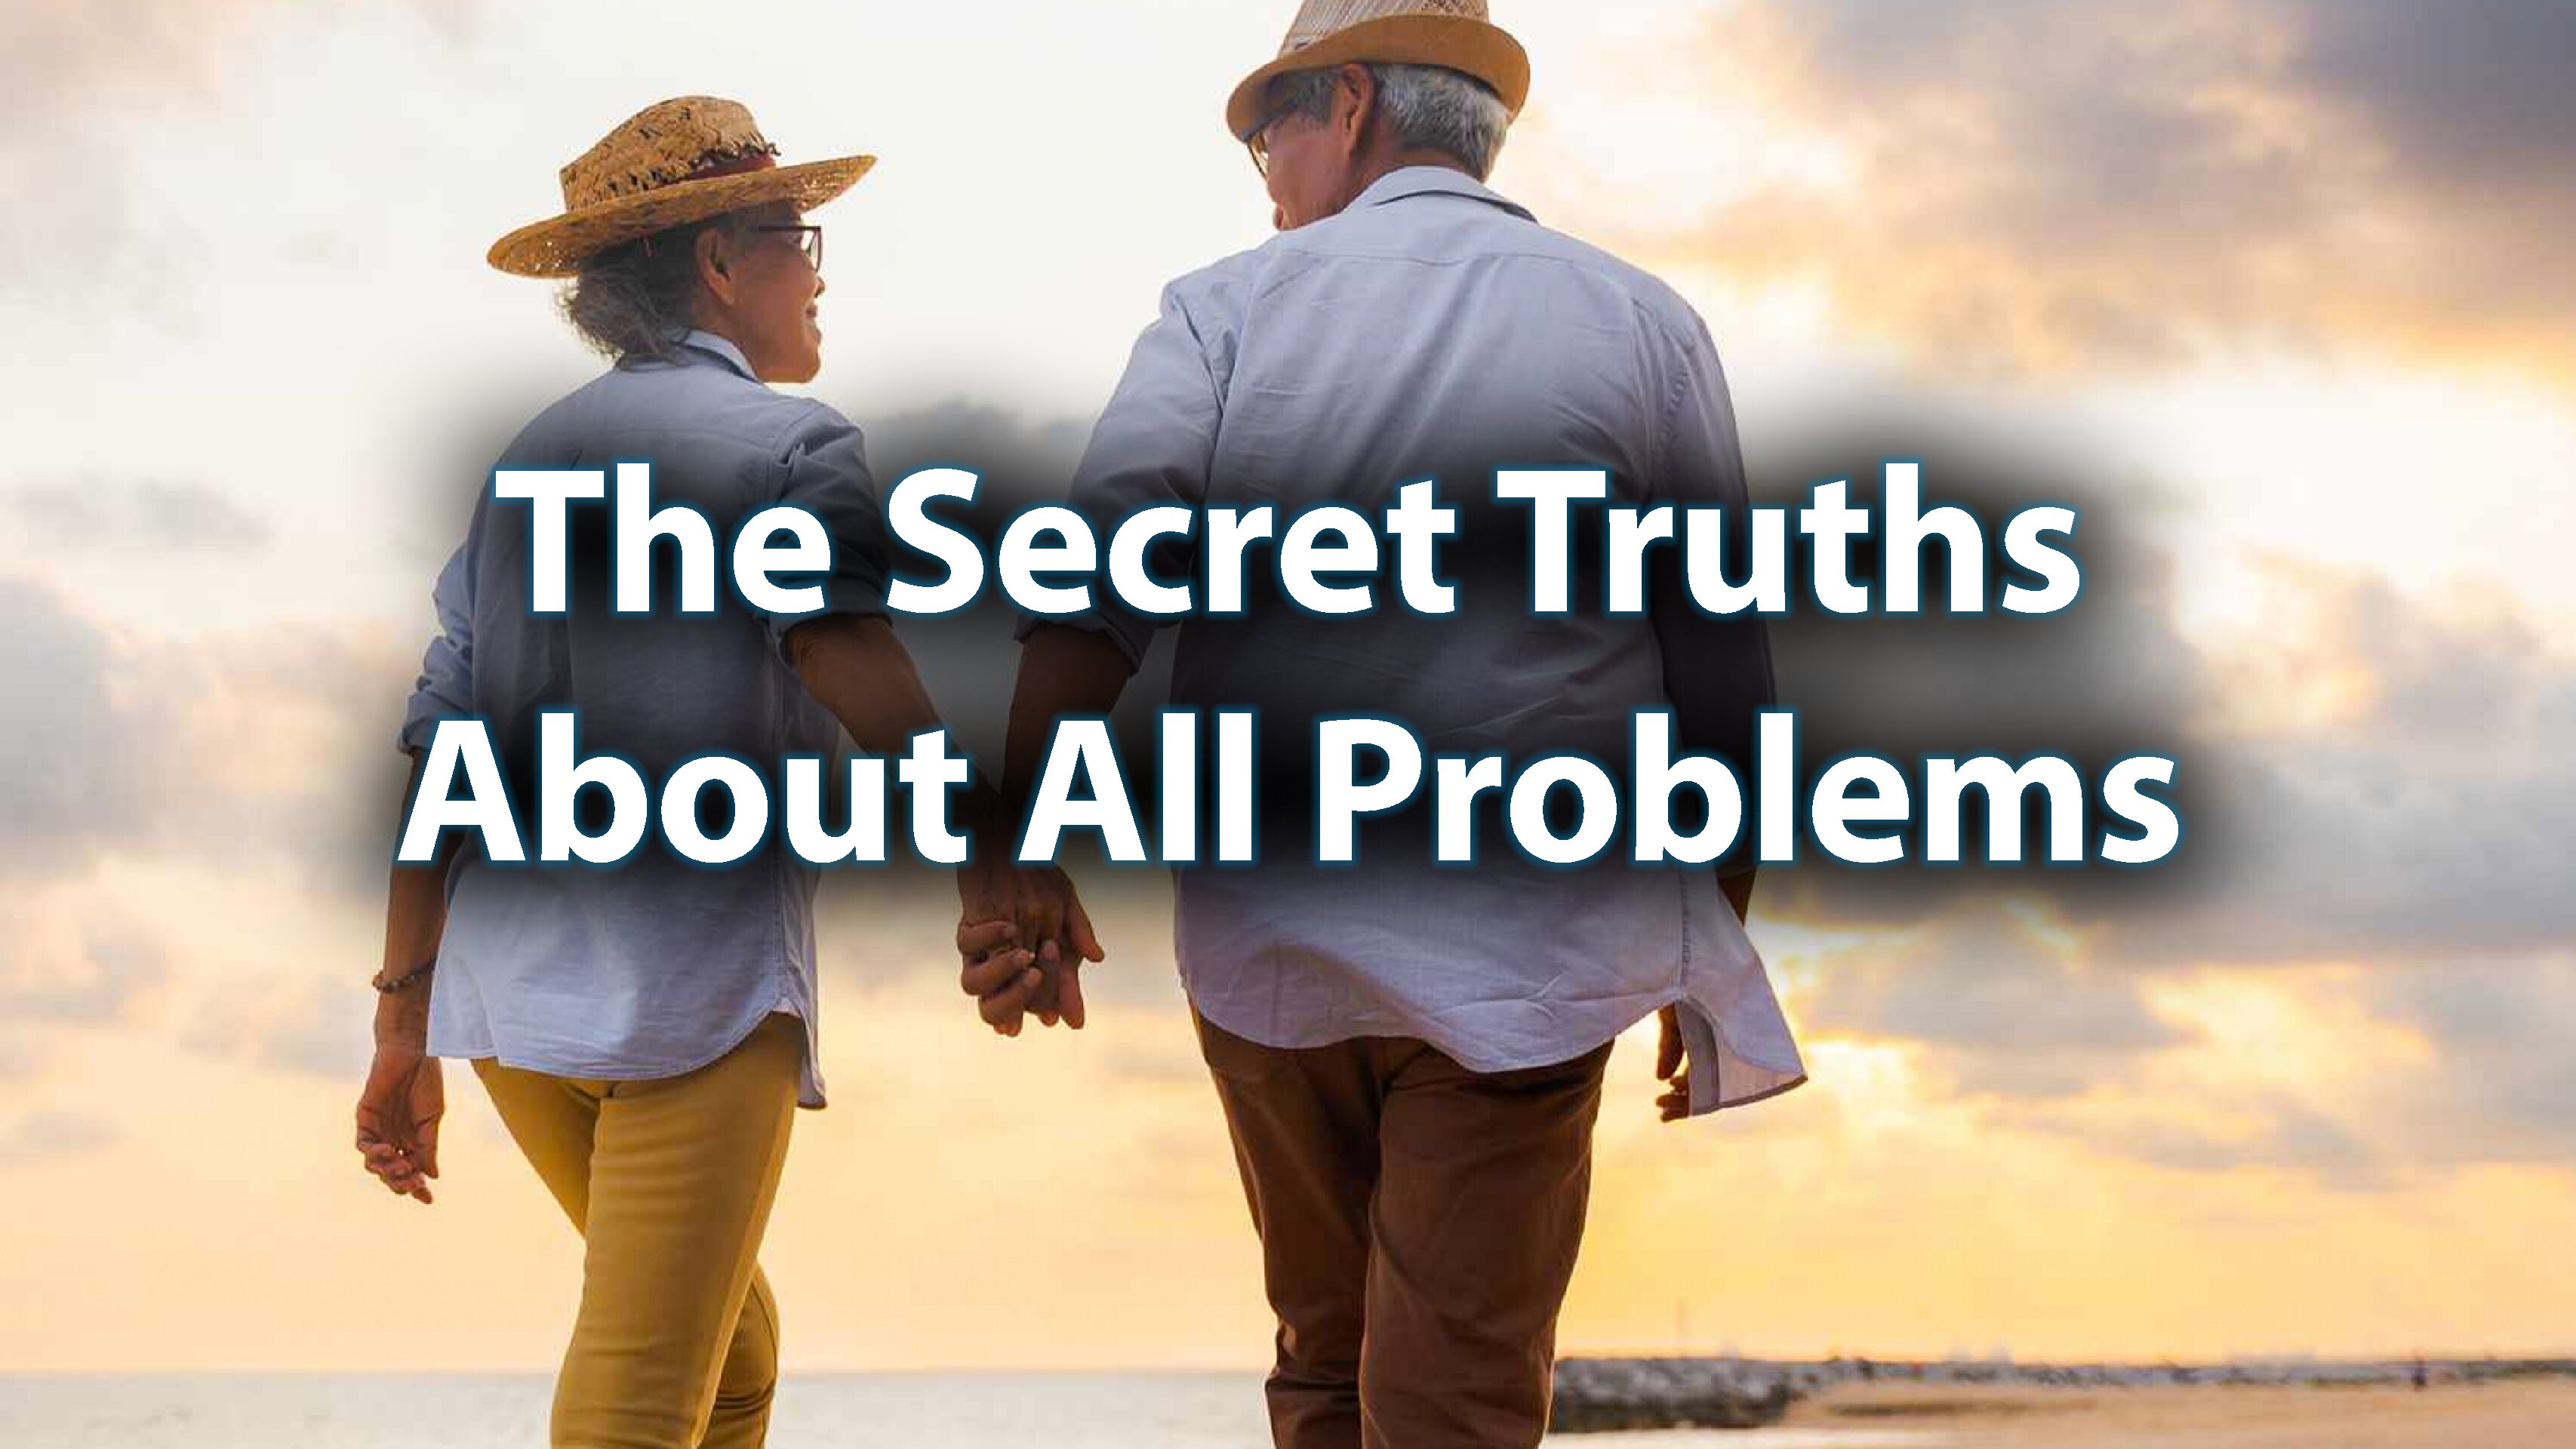 Day 18: The Secret Truths About All Problems